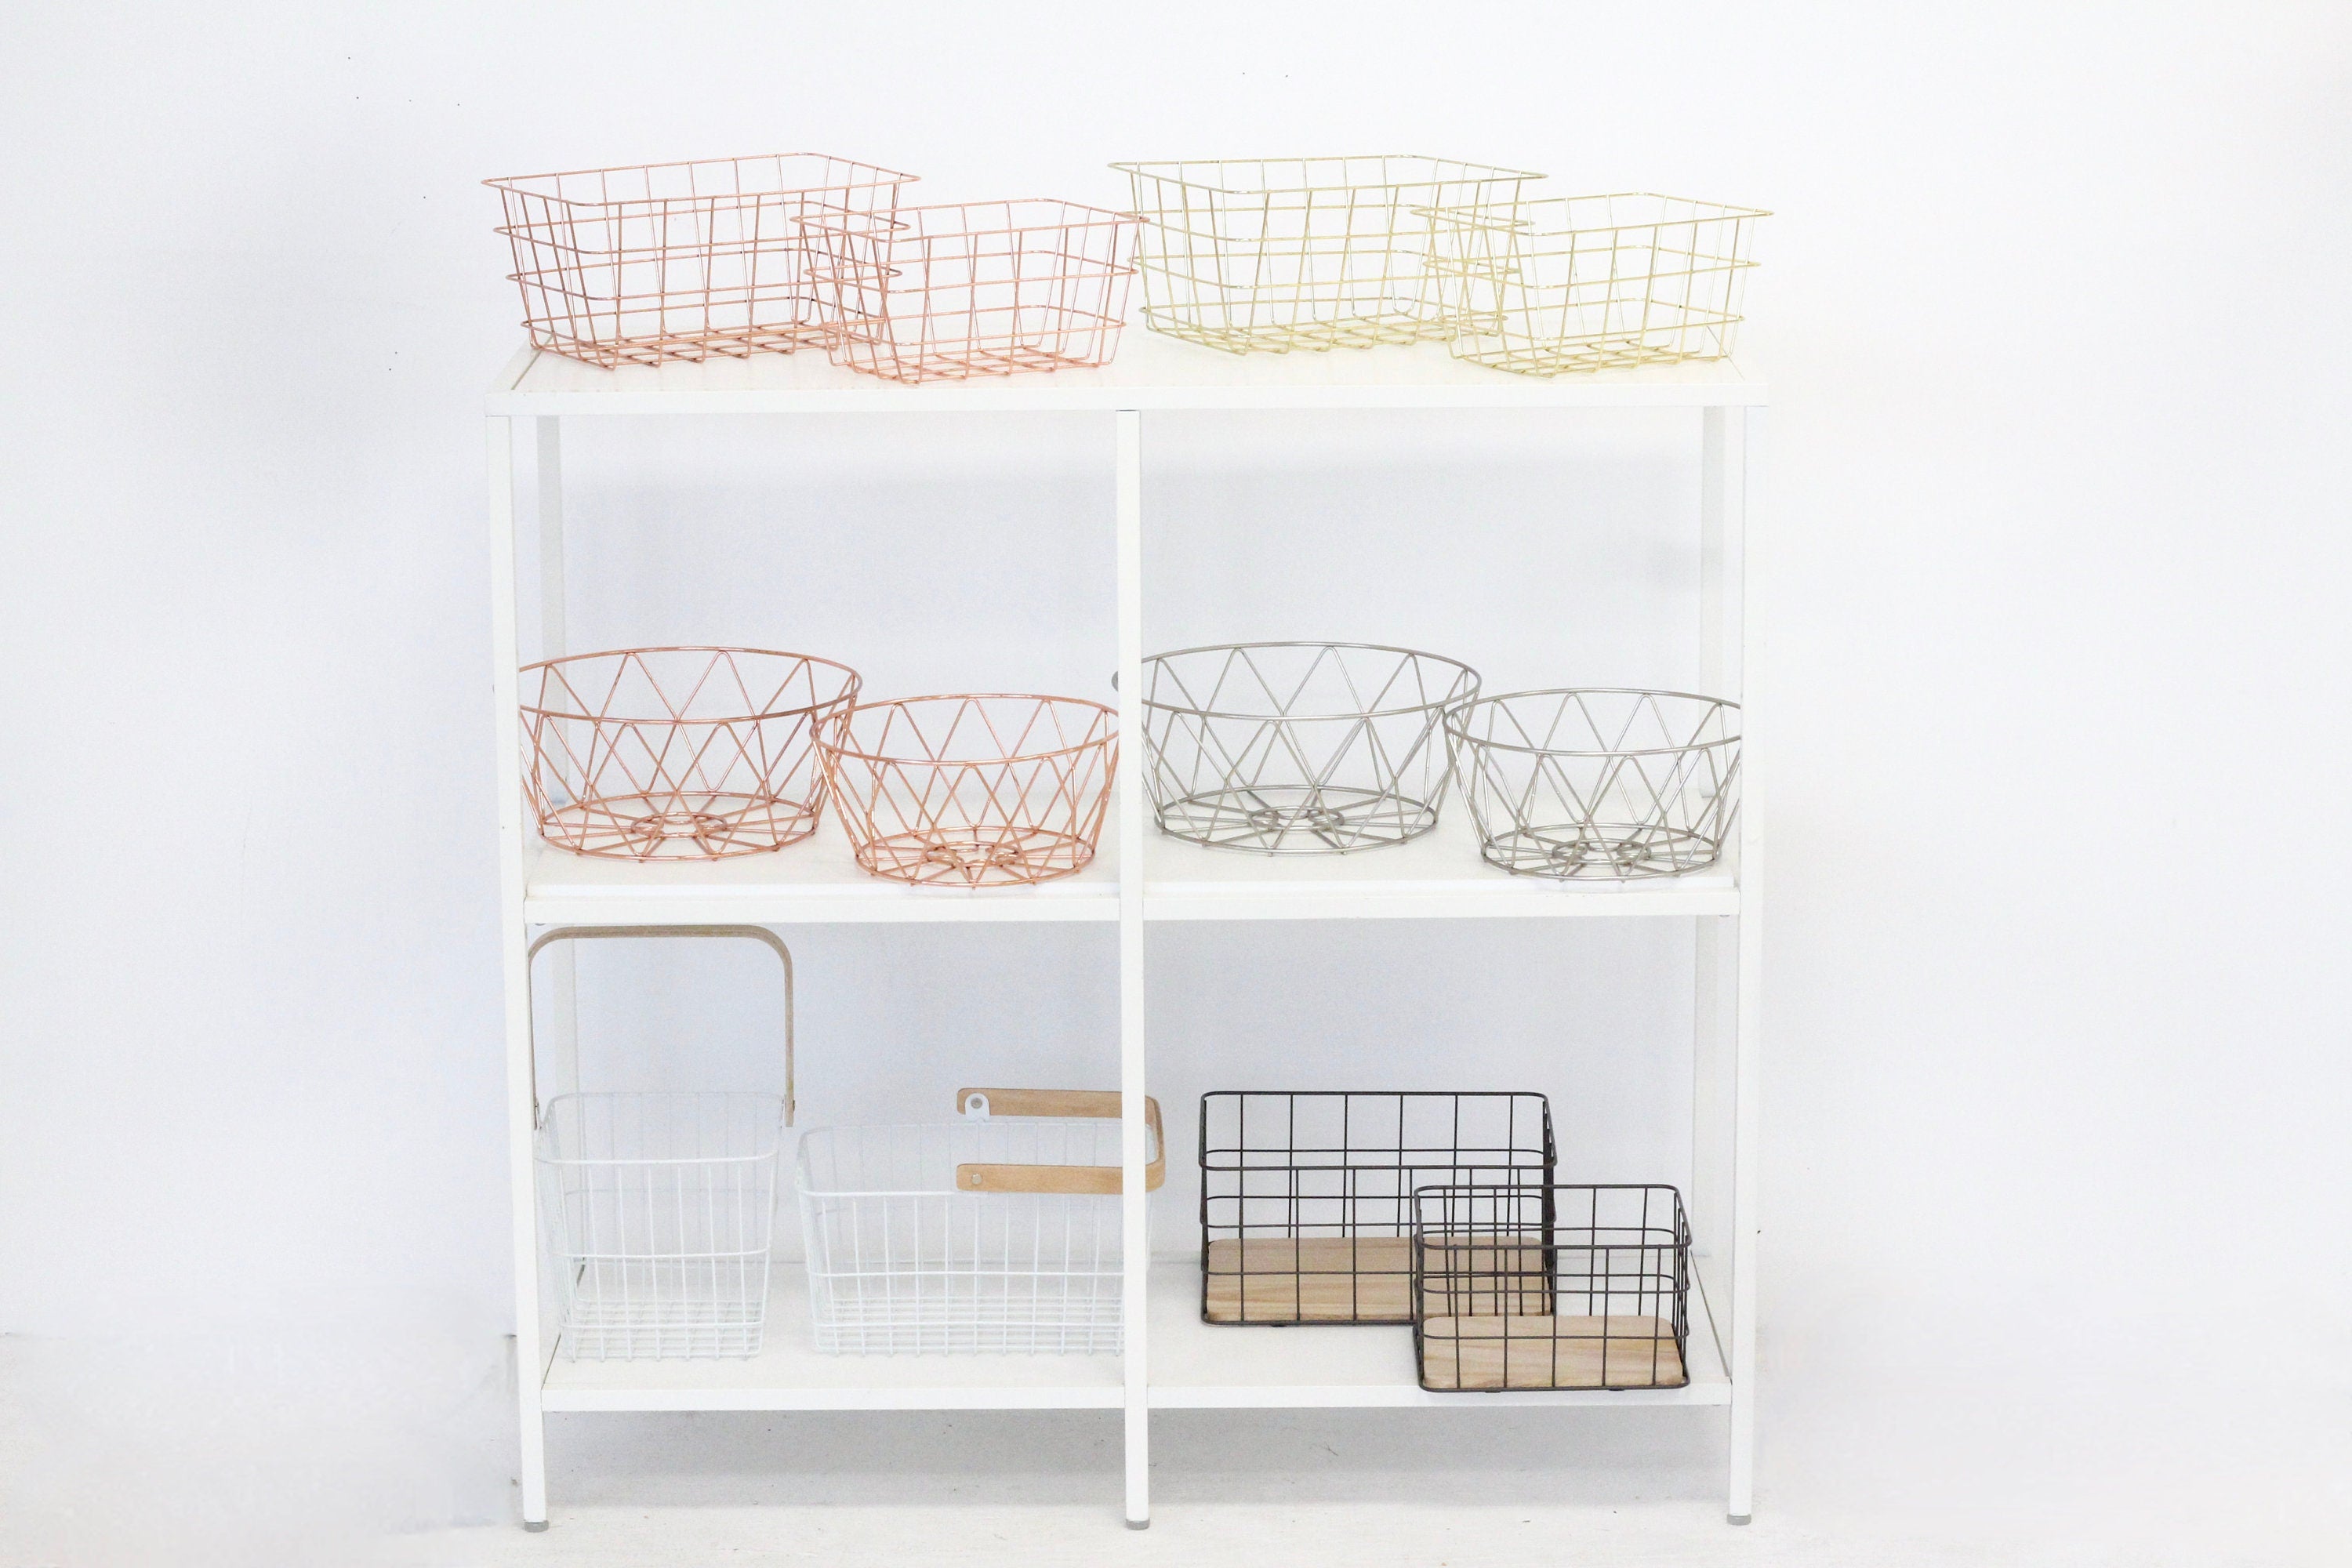 Metal Wire and Wood Basket for Food, Pantry Organization, Bathroom Storage and Entryway